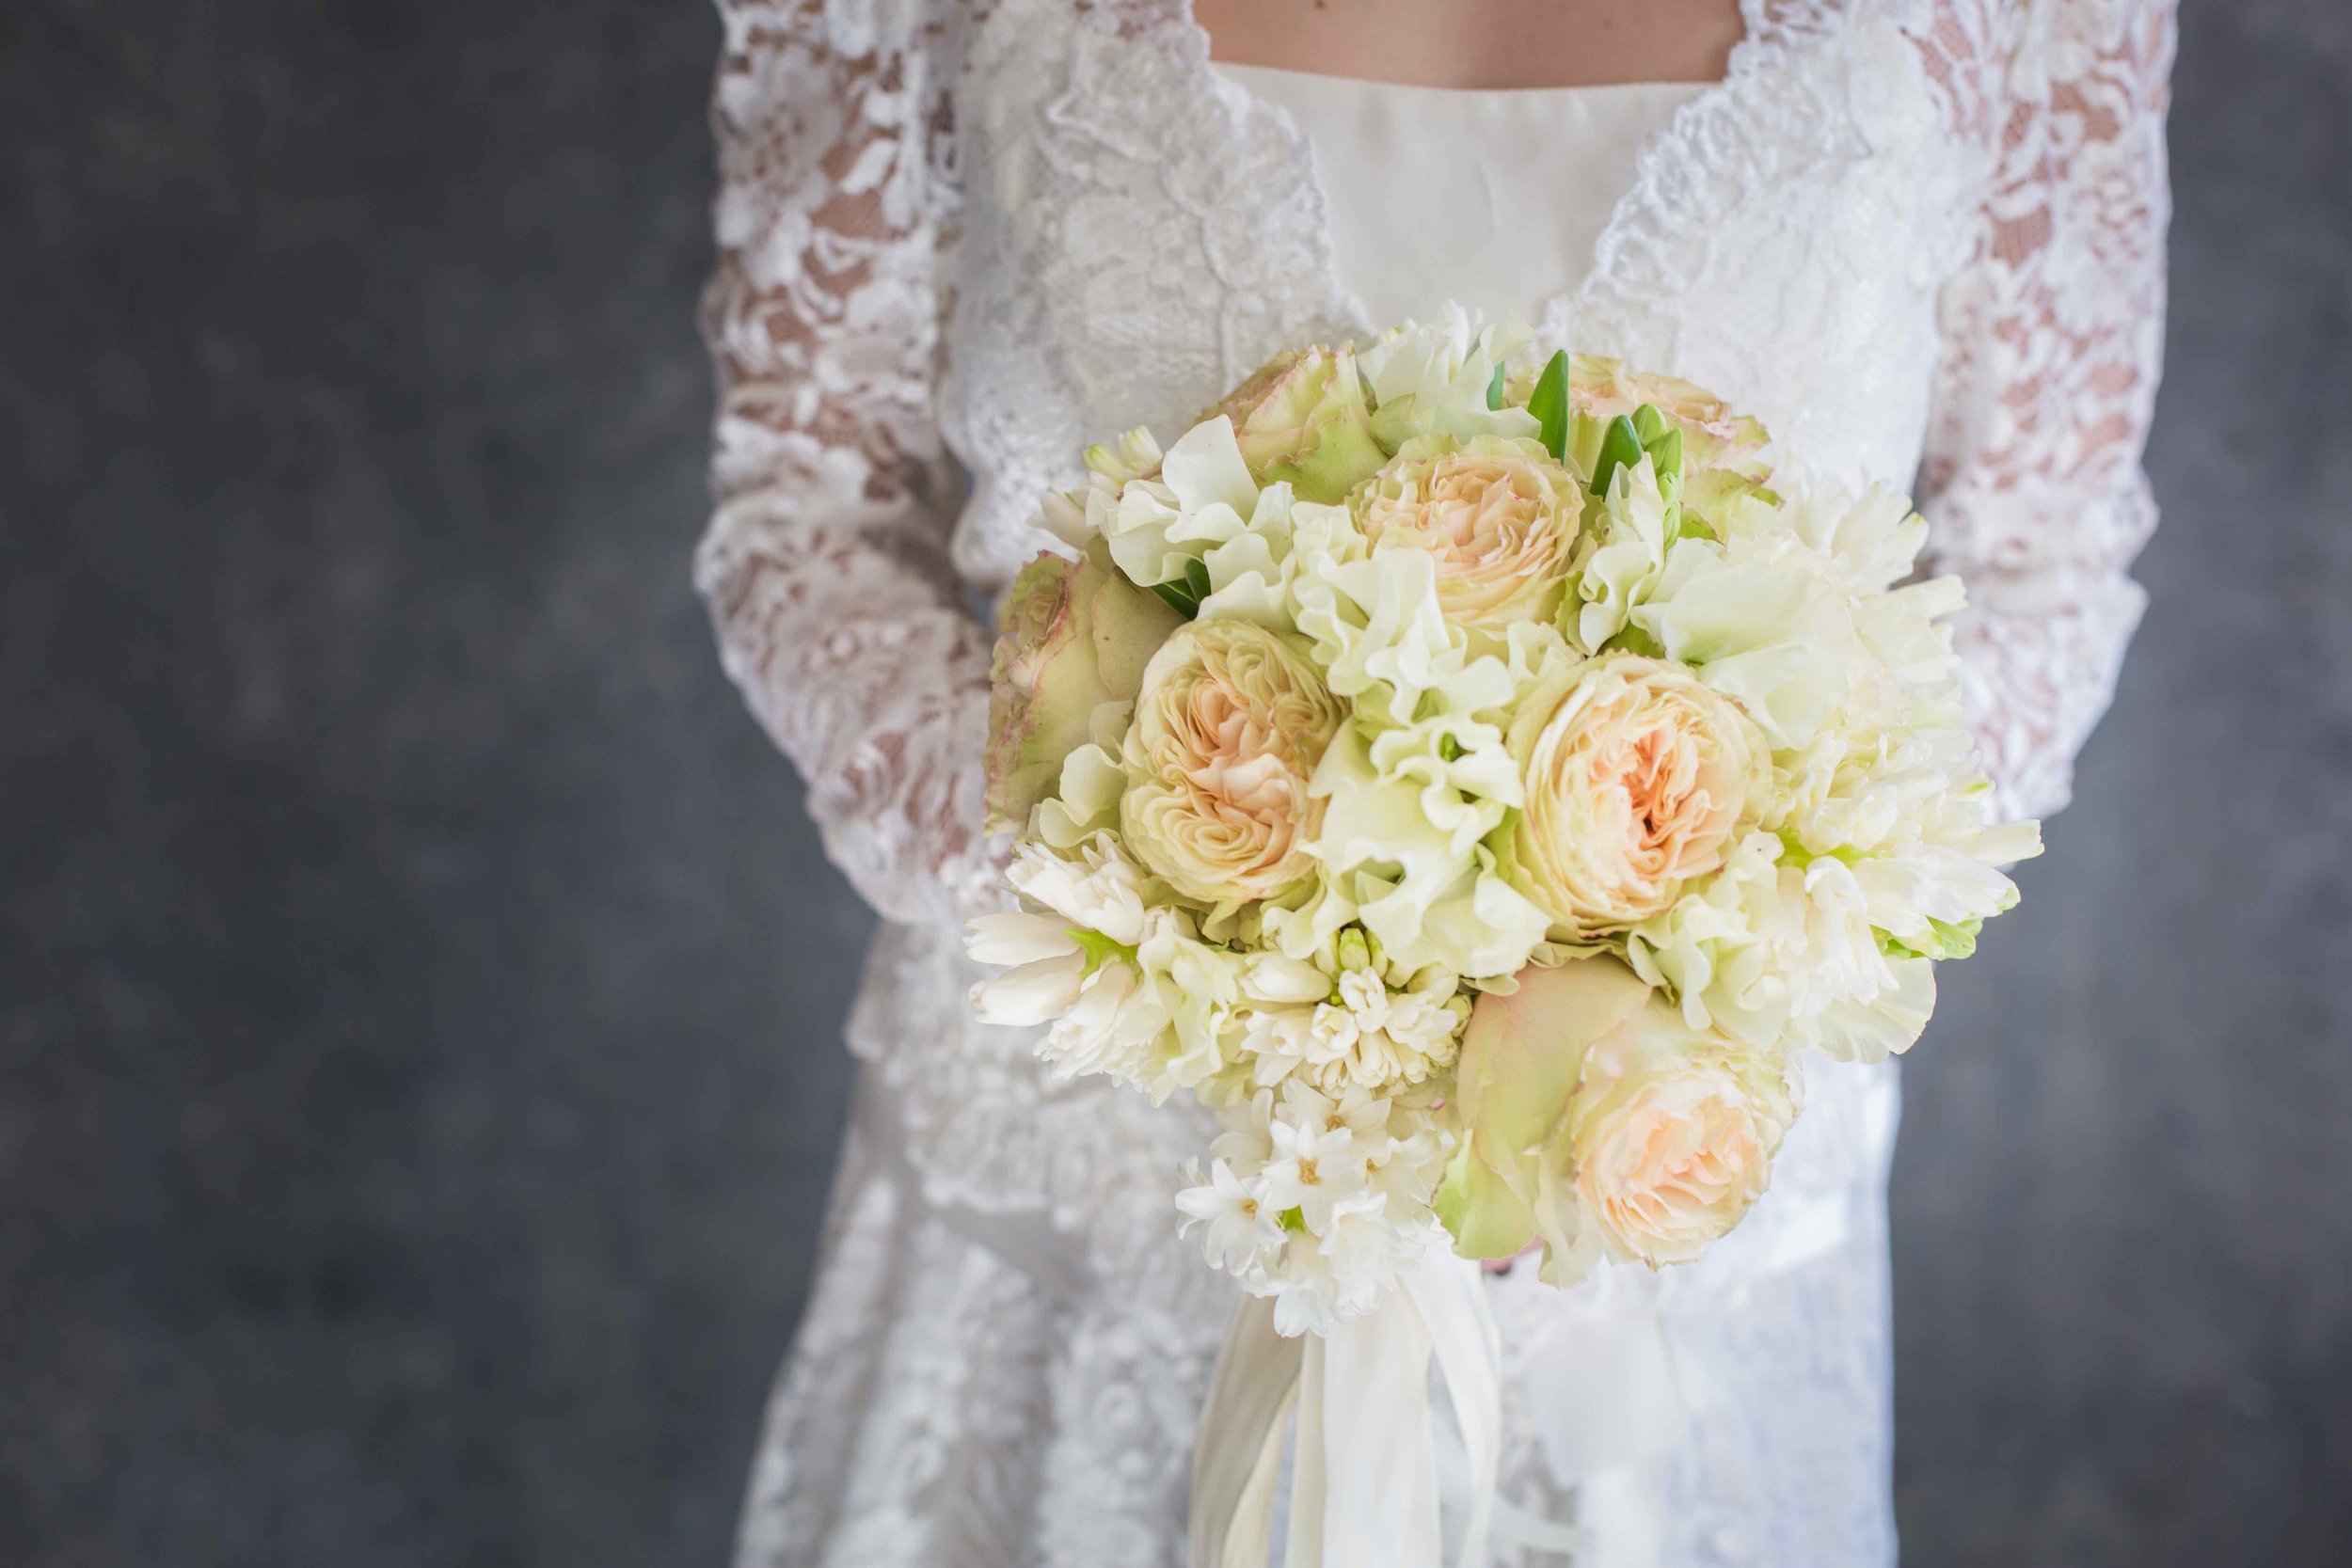 LHphotography - bride bouquets (40 of 85).jpg